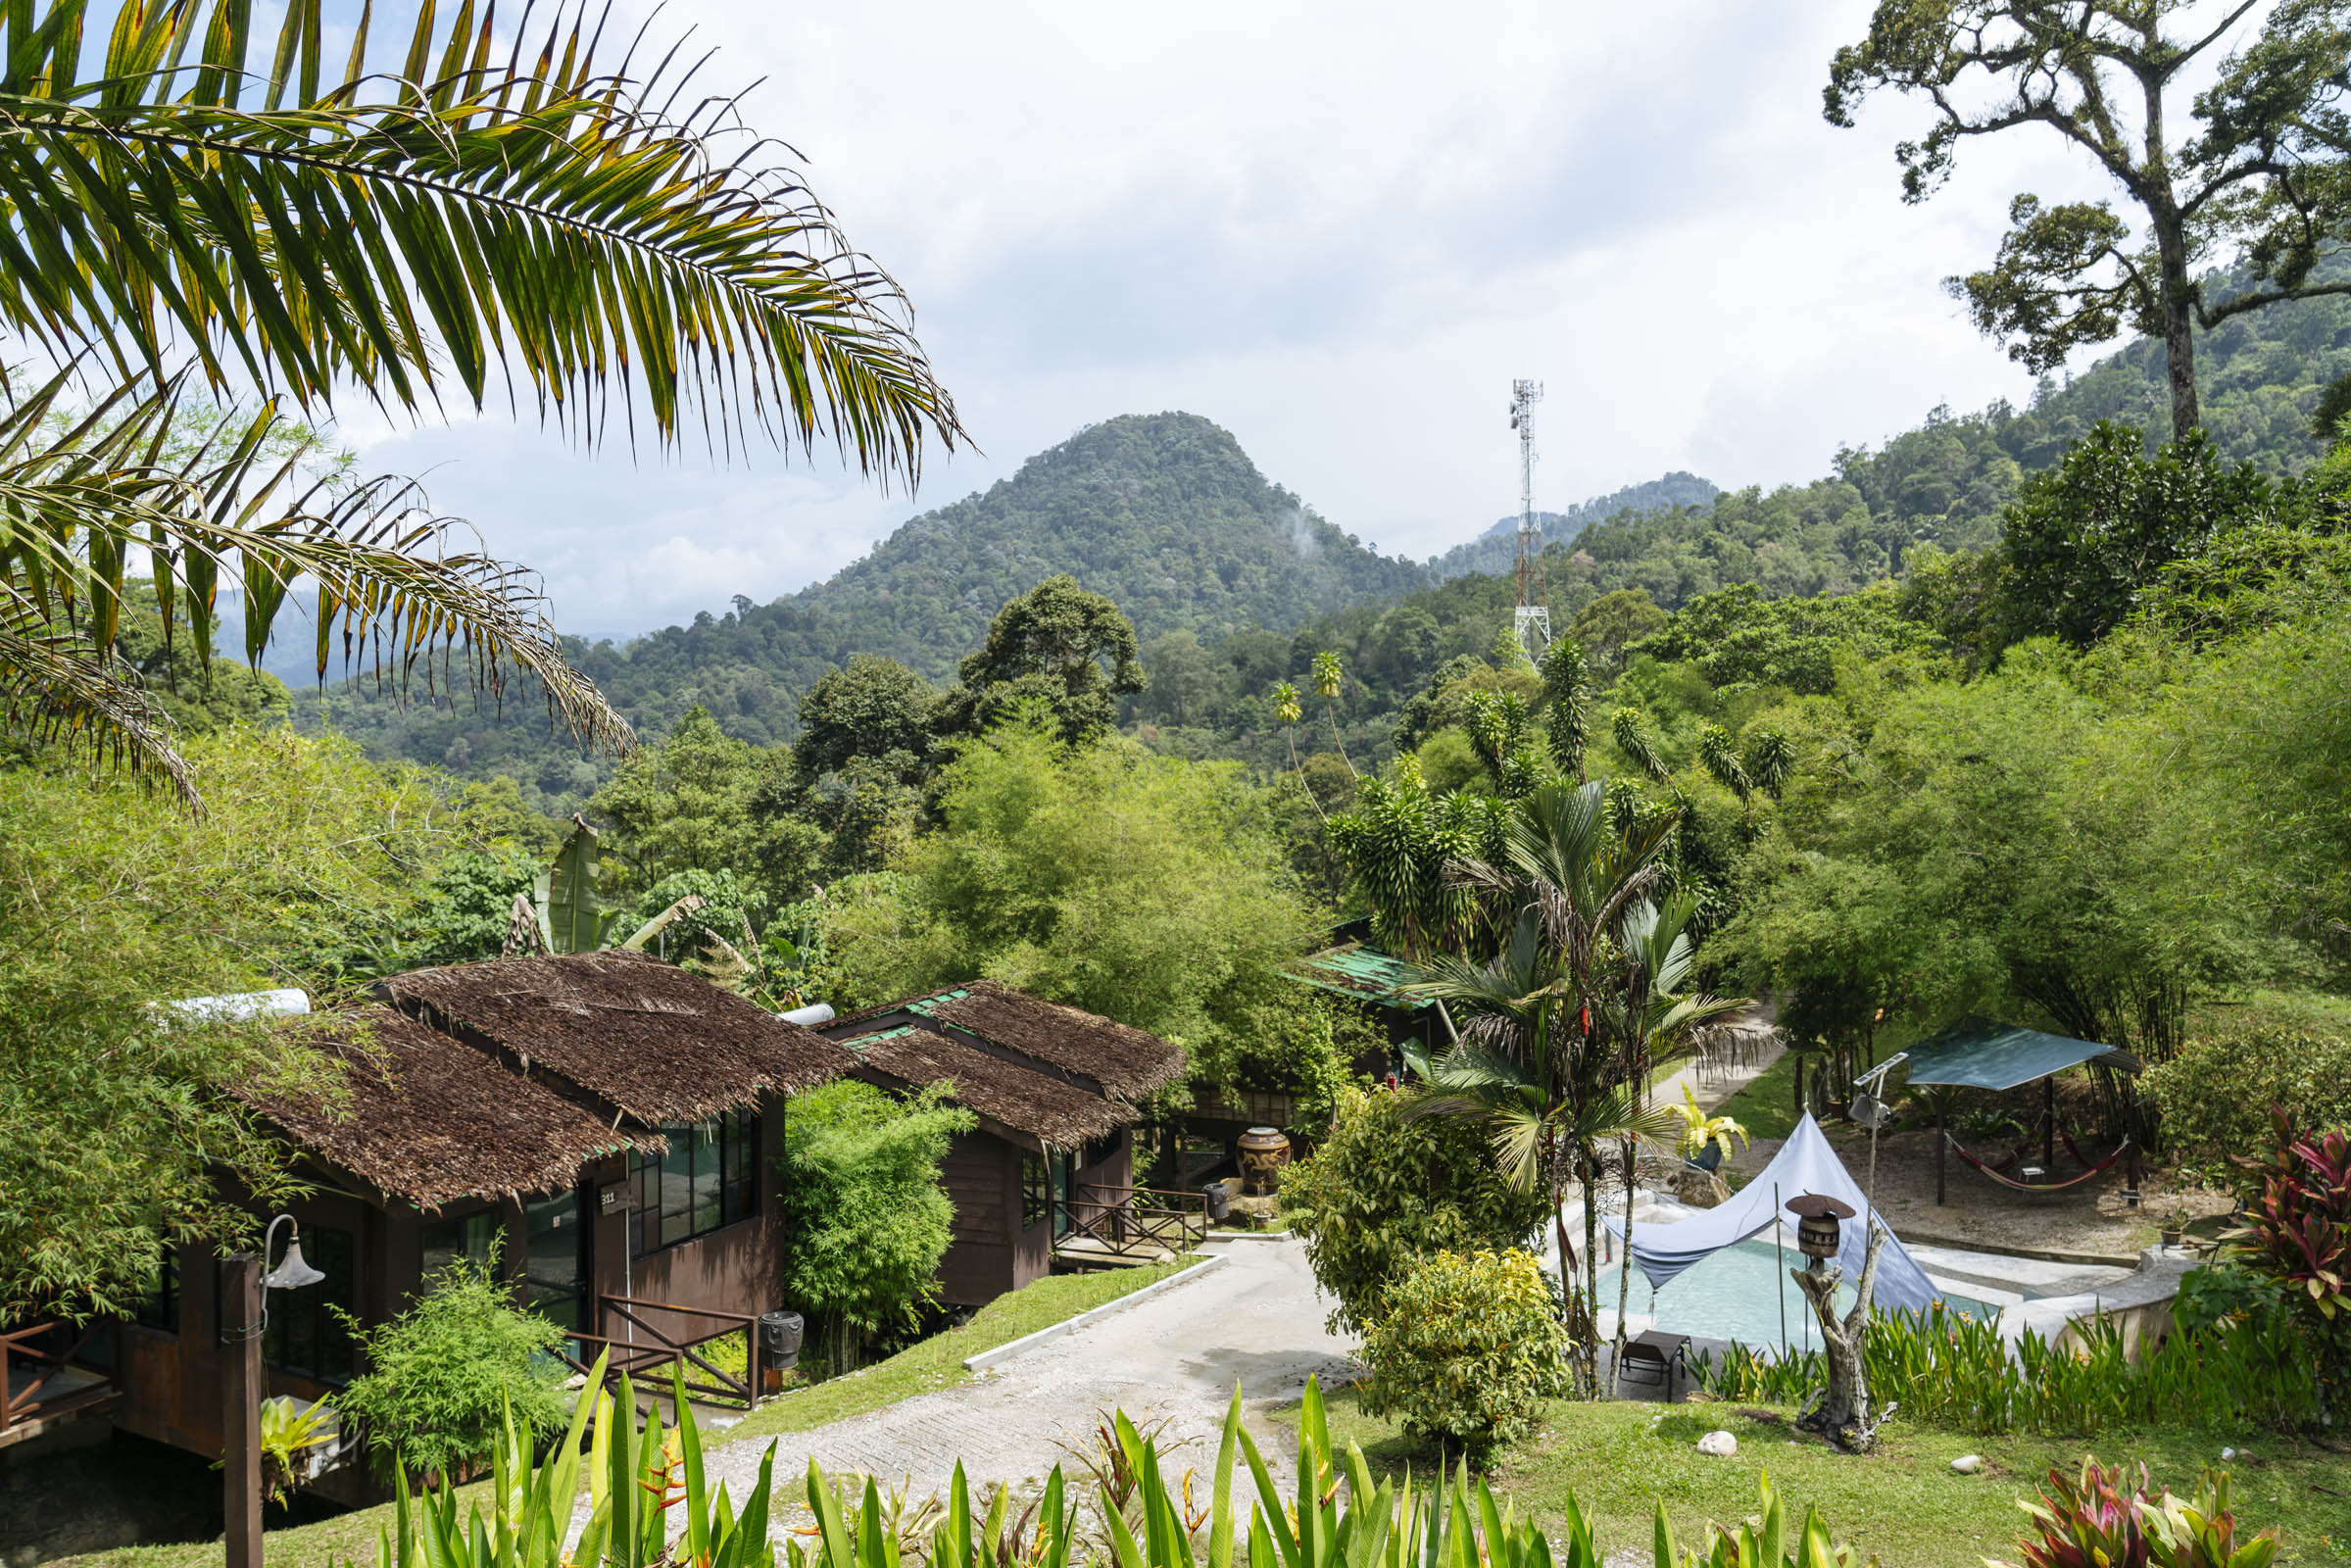 Adeline Villa and Rest House is nestled in a gorgeous rainforest setting. Photo by Teoh Eng Hooi.